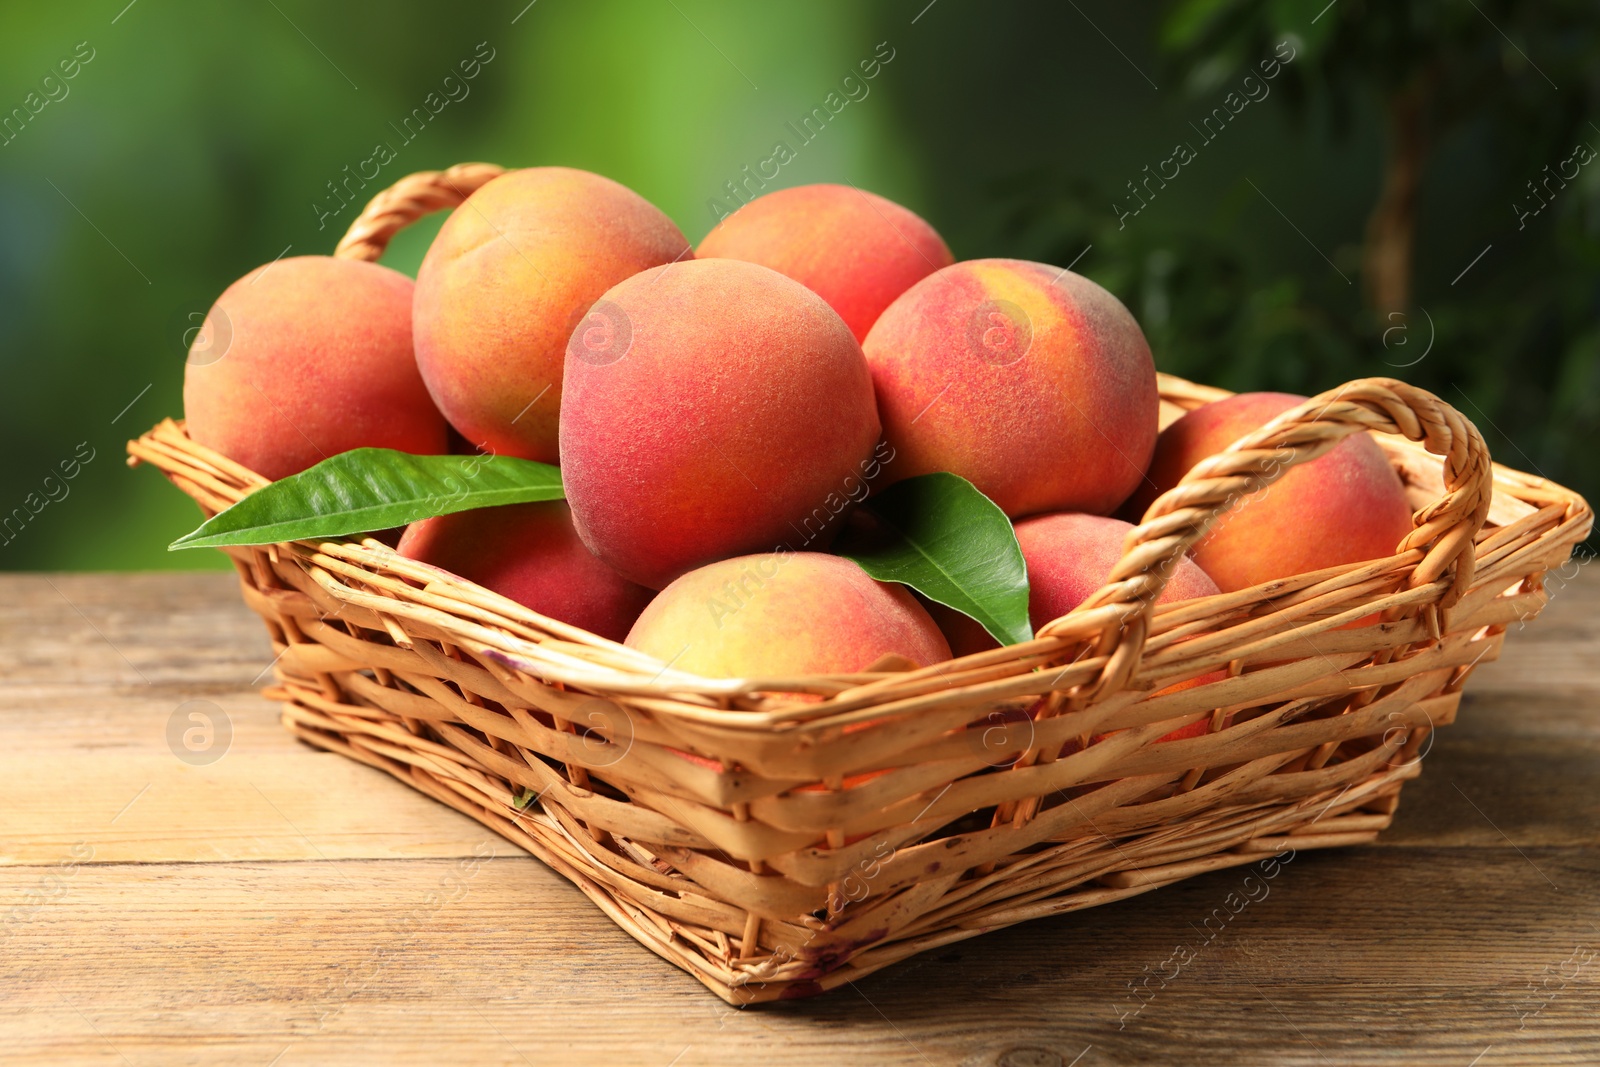 Photo of Fresh peaches and leaves in basket on wooden table against blurred green background, closeup